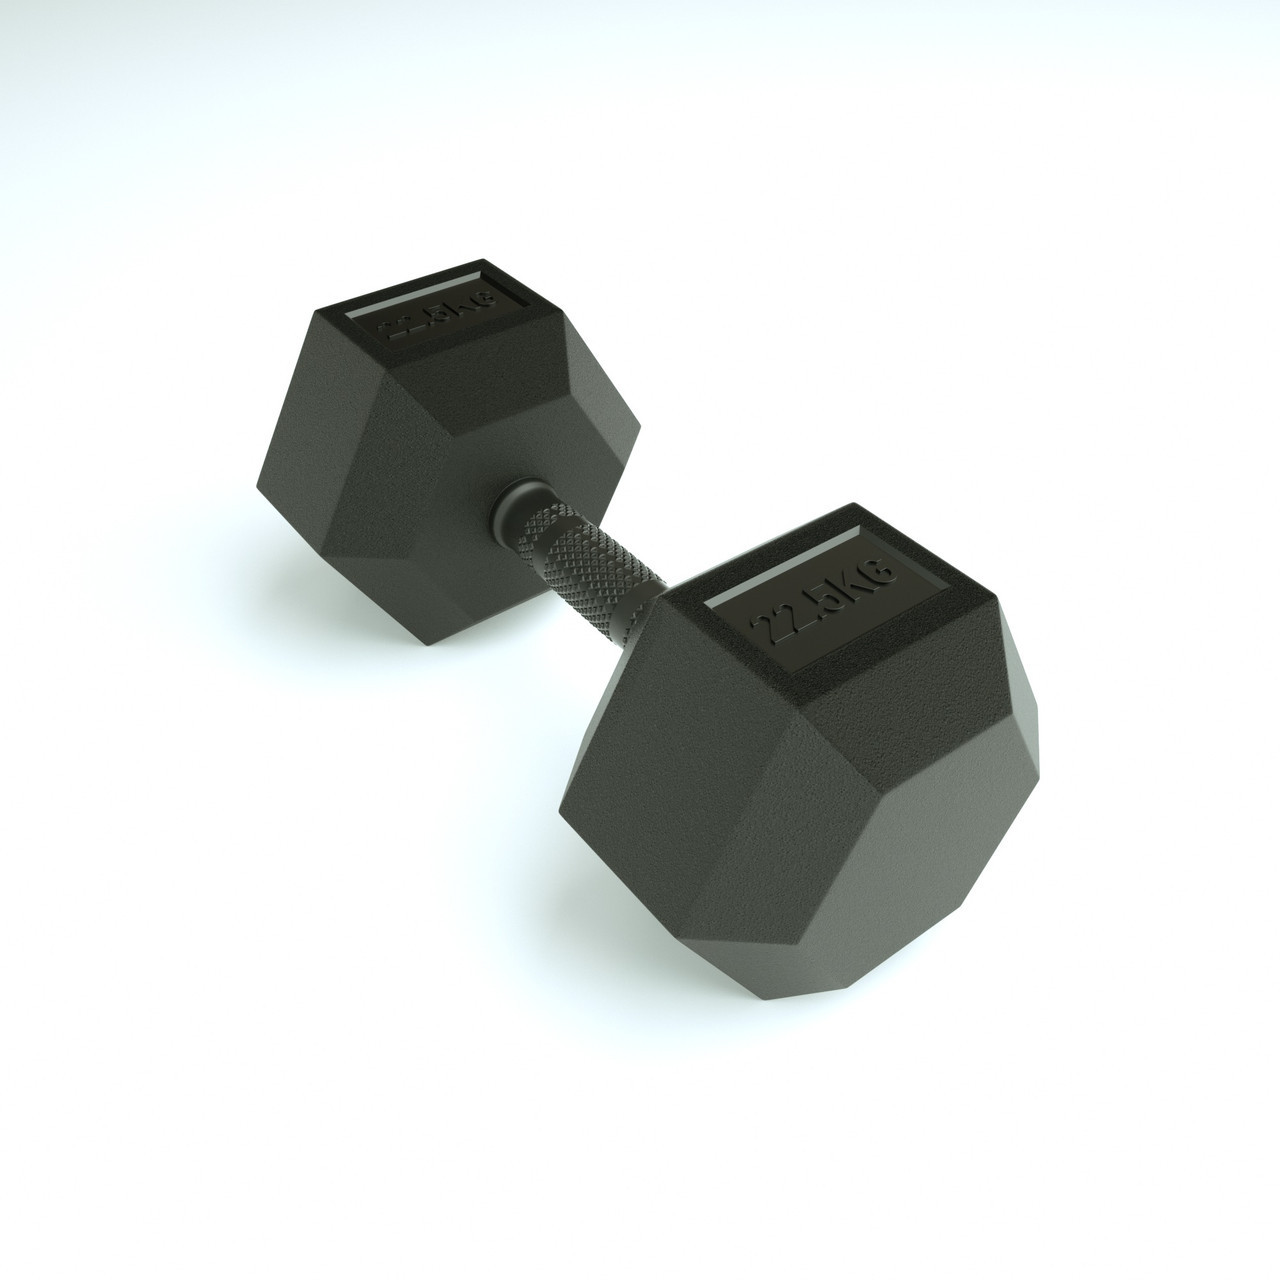 7.5kg Rubber Hex Dumbell - Rubber coated handle dumbbell (PAIR)